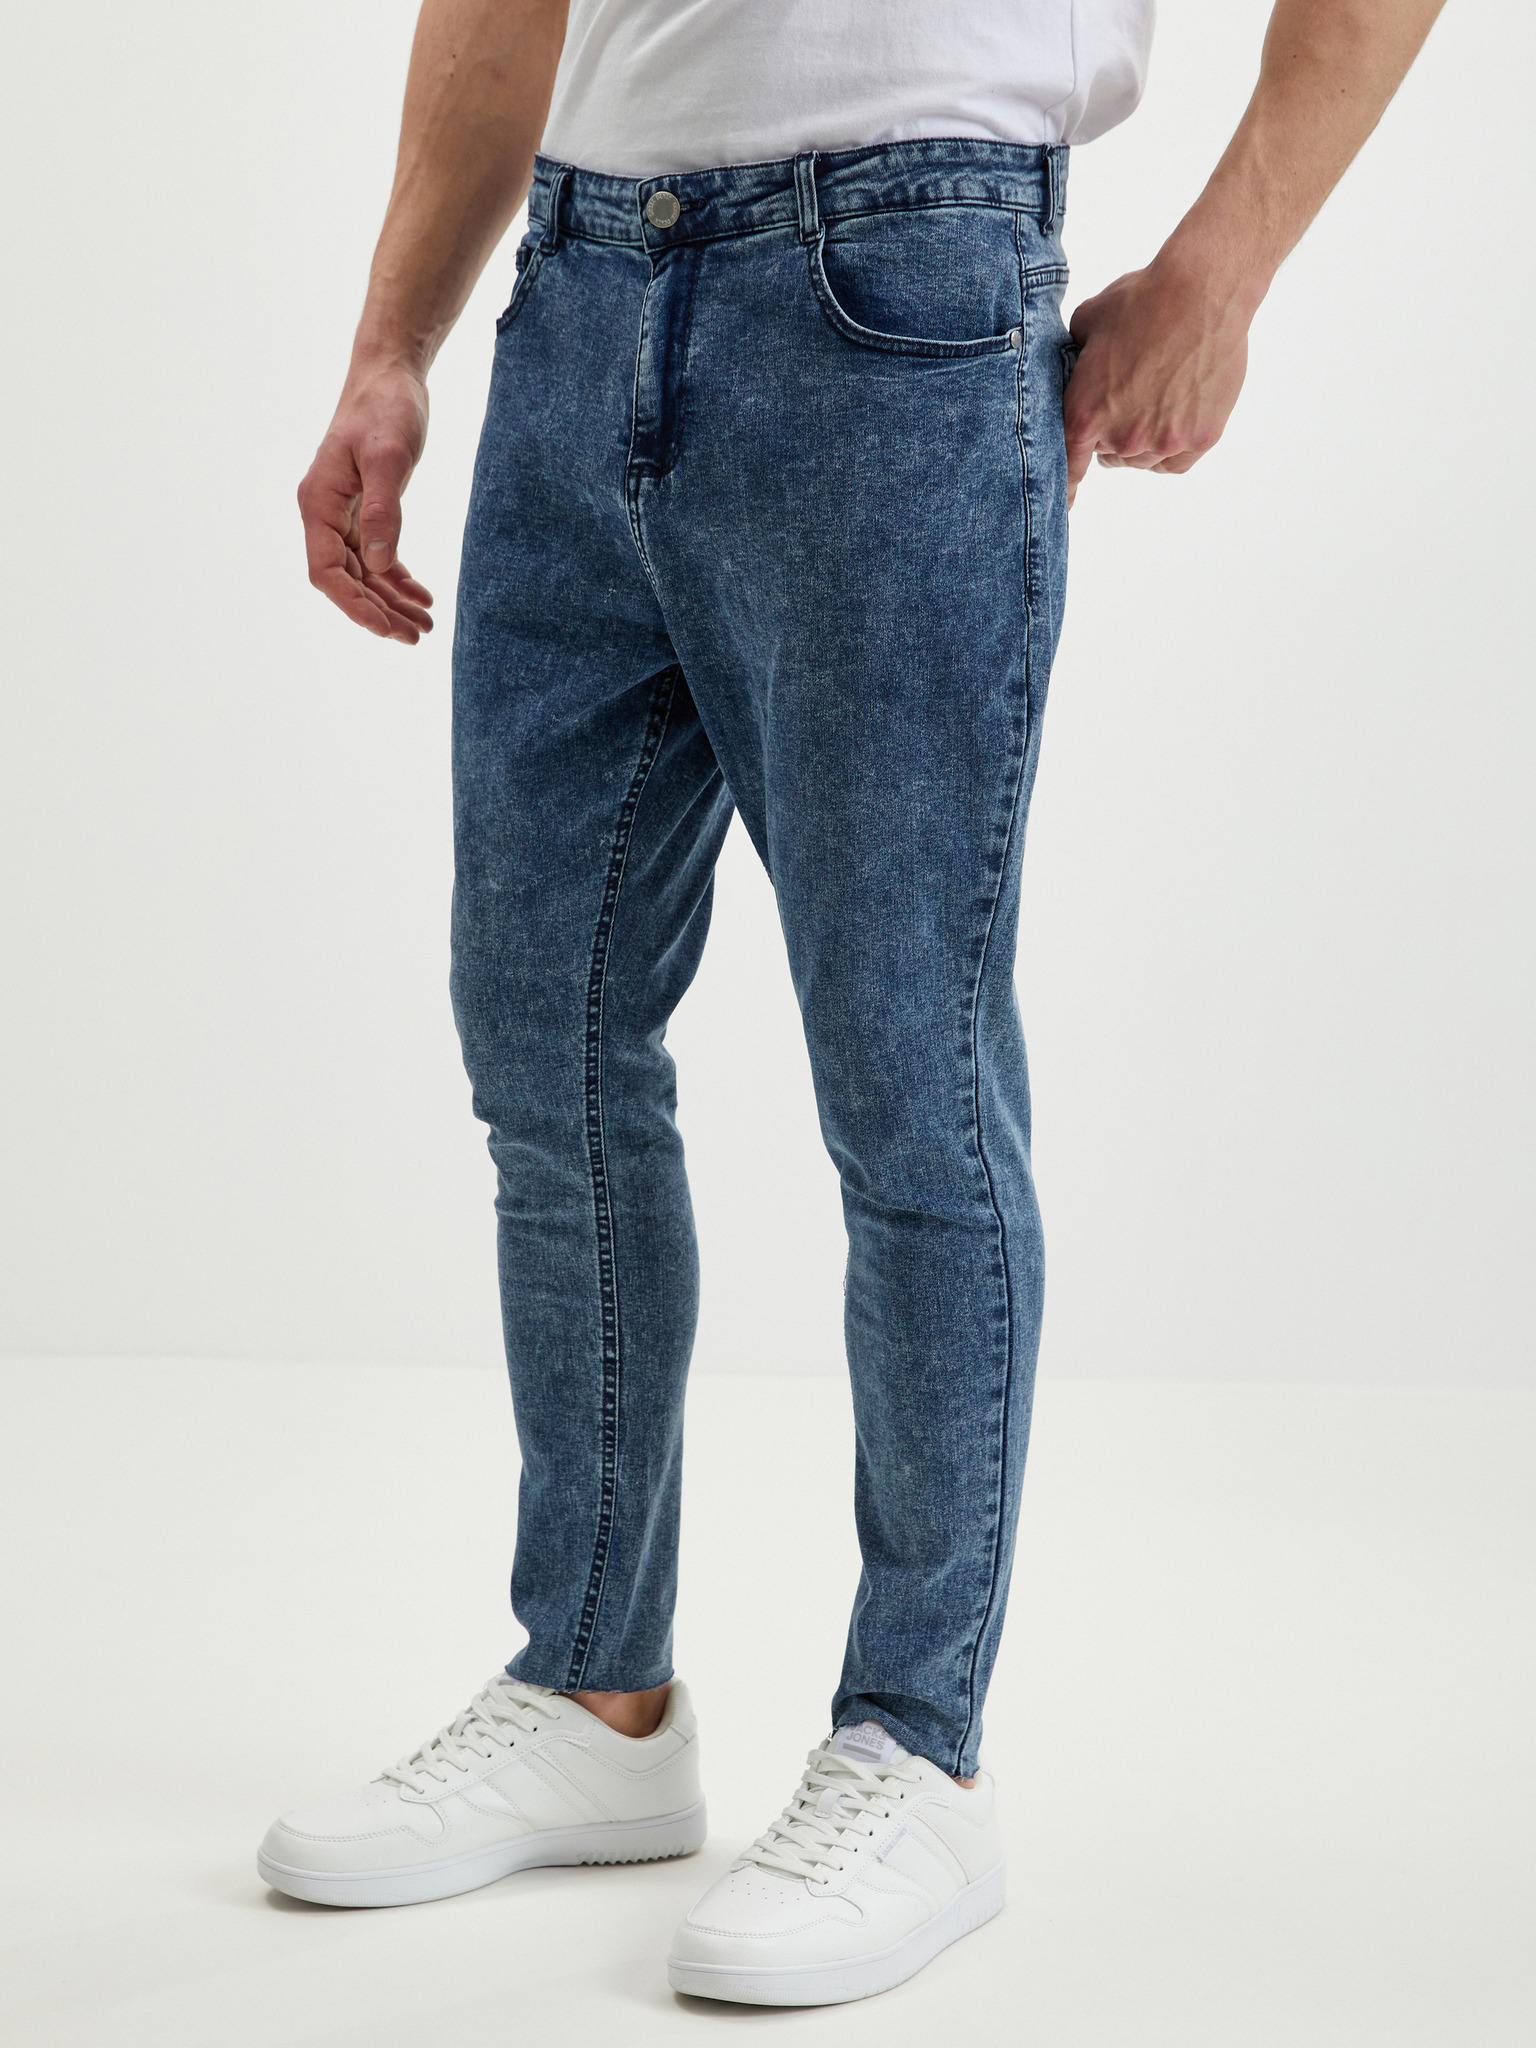 Jeans Ombre Clothing